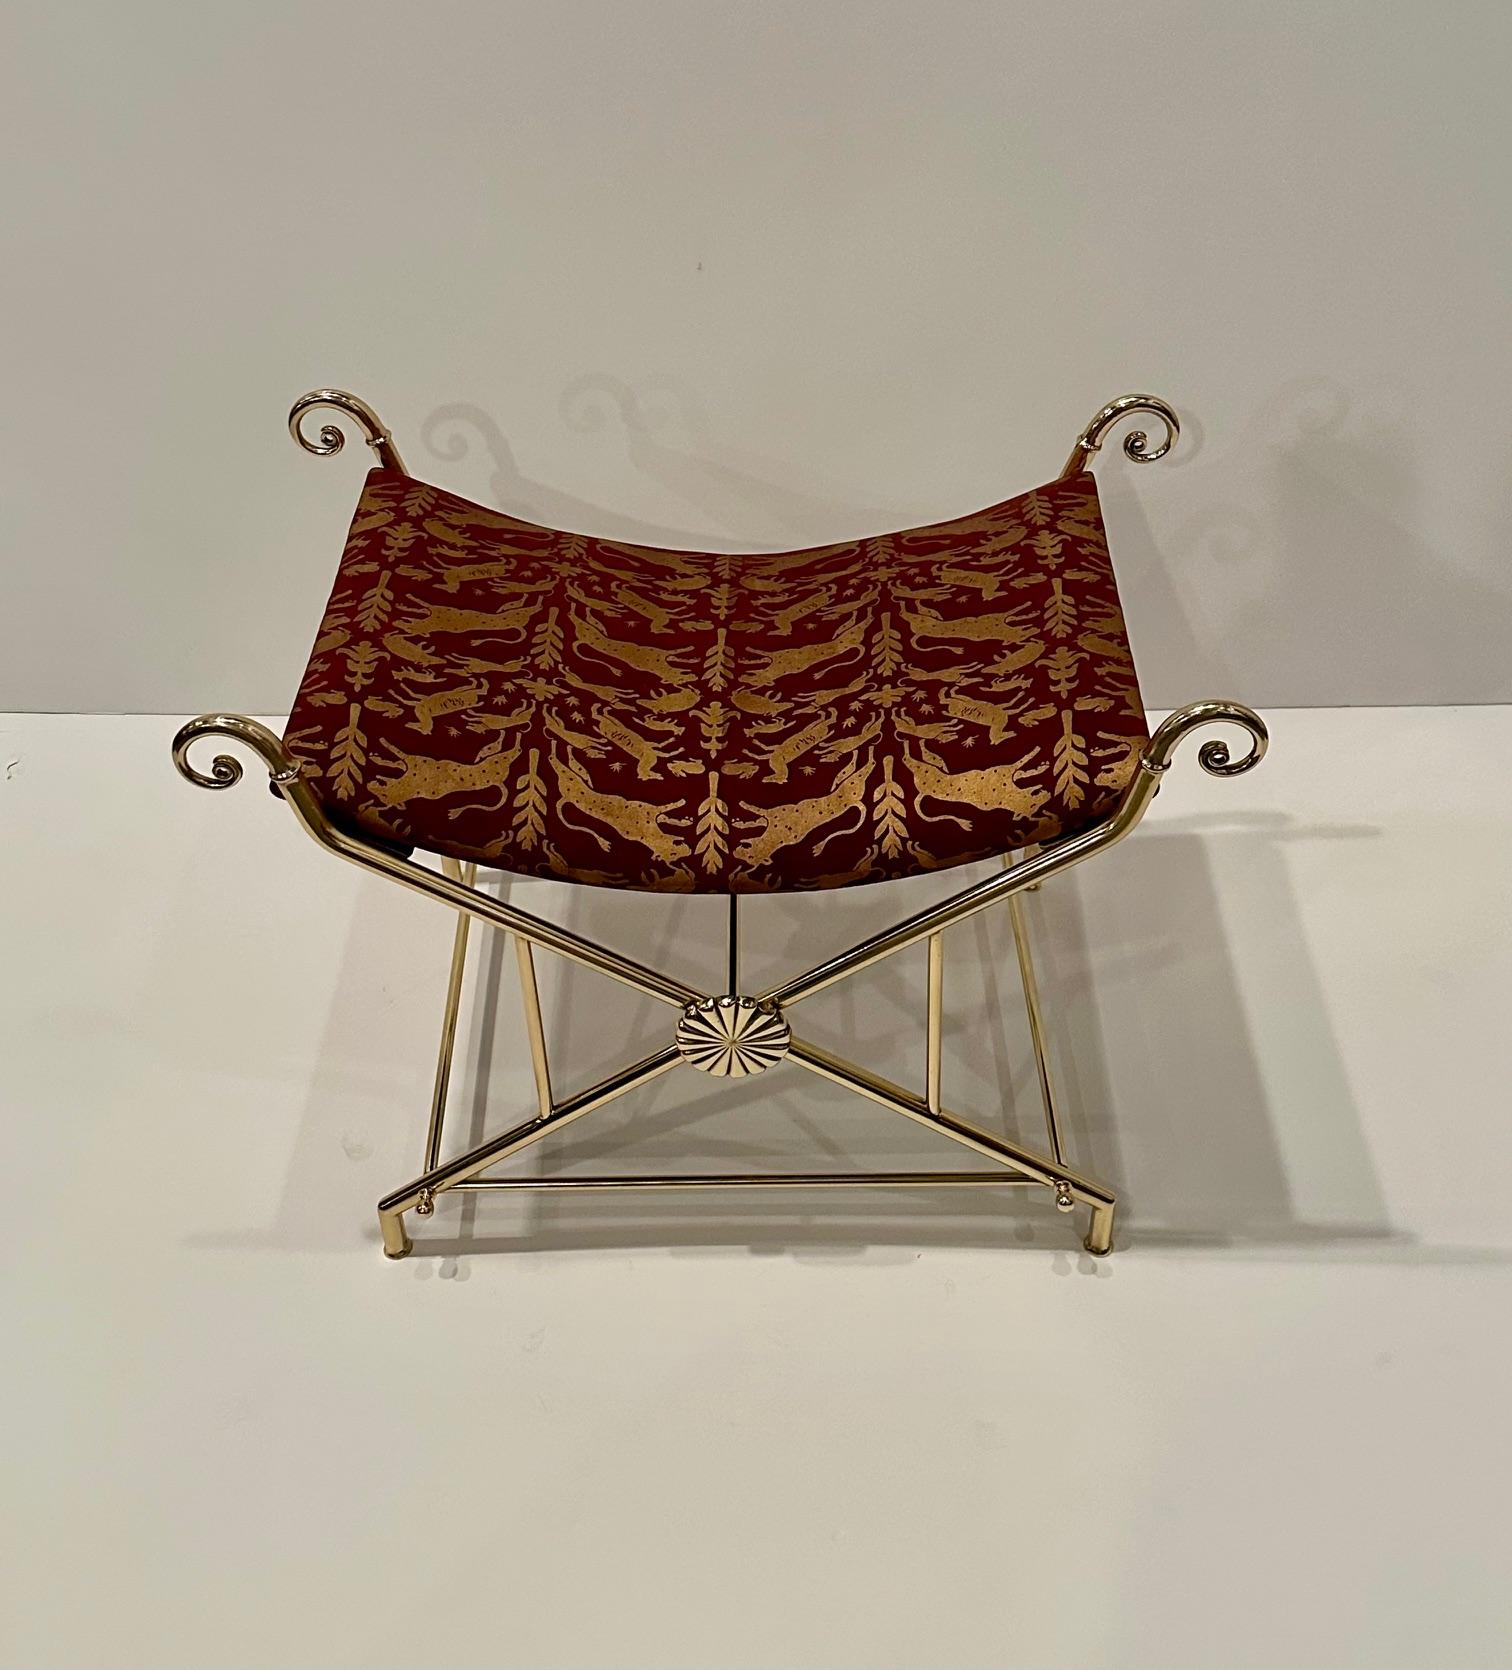 Glamorous Hollywood Regency Italian Brass Bench with Printed Leather Upholstery For Sale 4